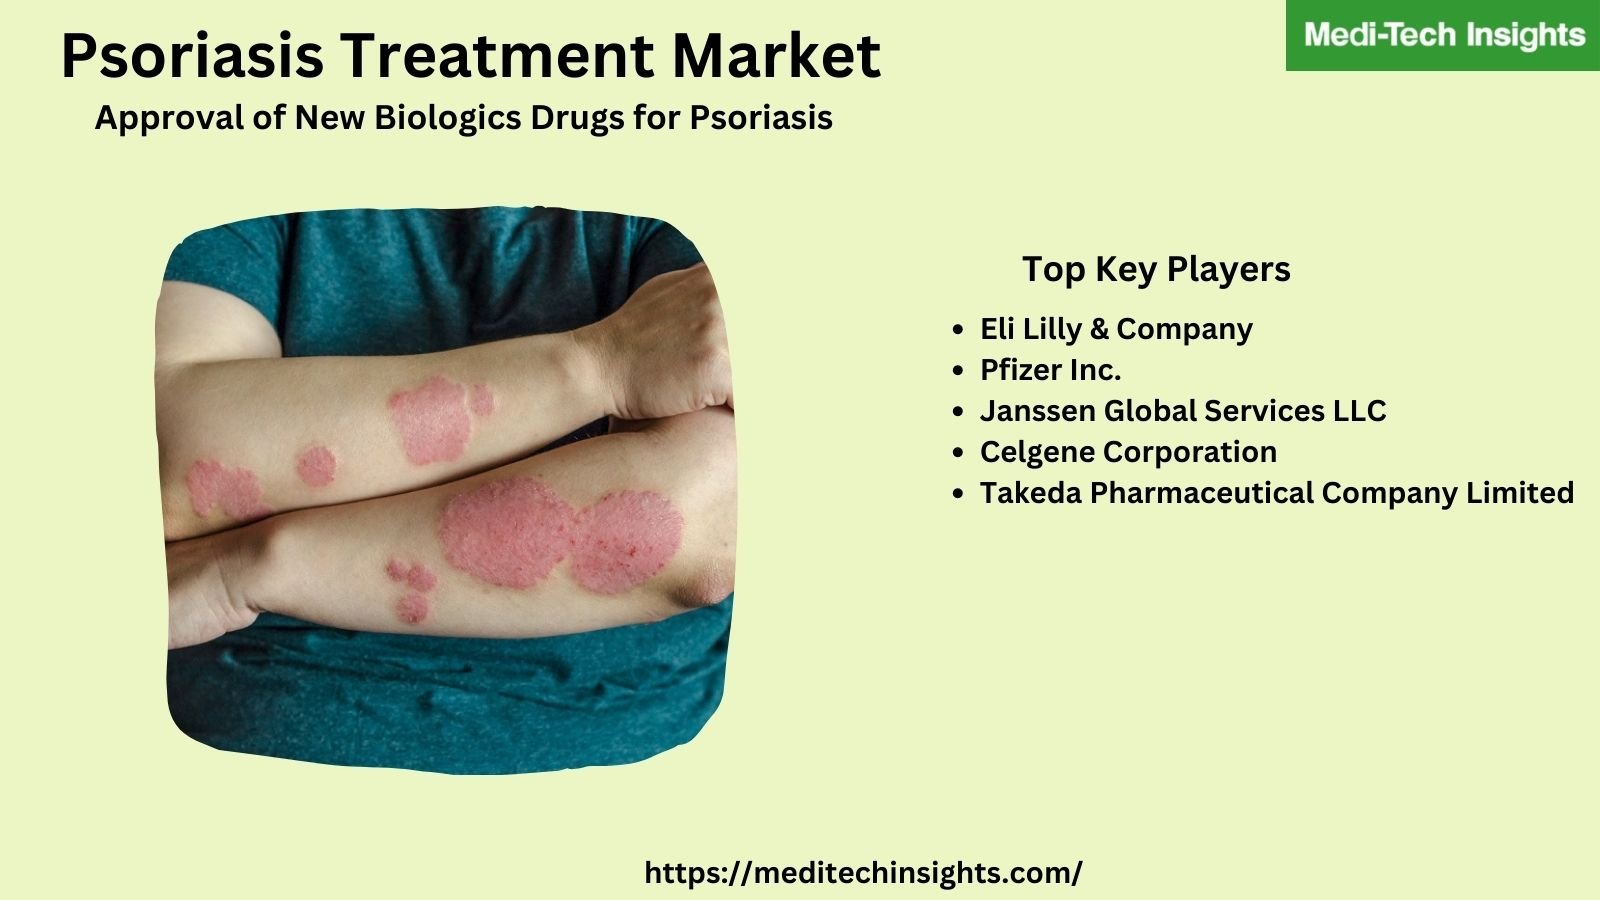 Global Psoriasis Treatment Market is anticipated to grow at a CAGR of ~8.5% by 2026